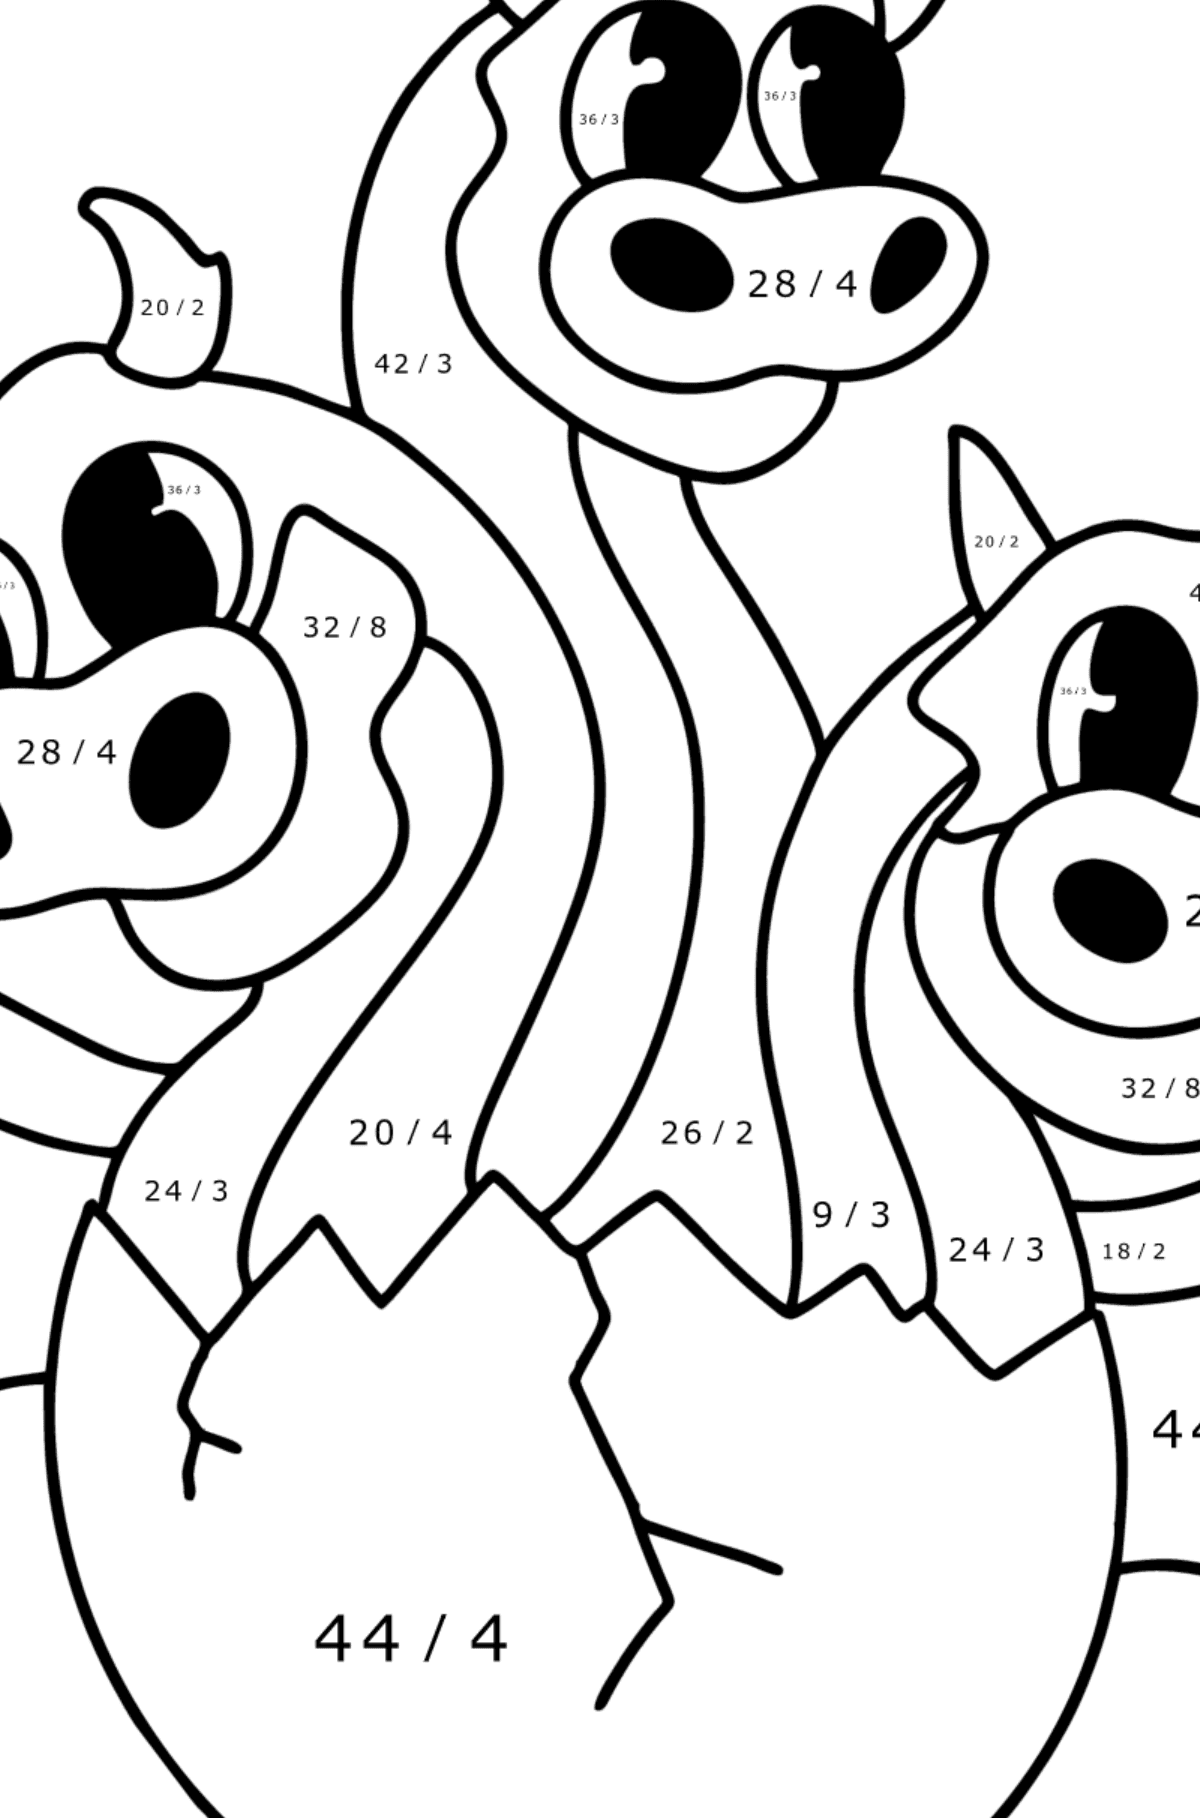 Dragon with three heads coloring page - Math Coloring - Division for Kids